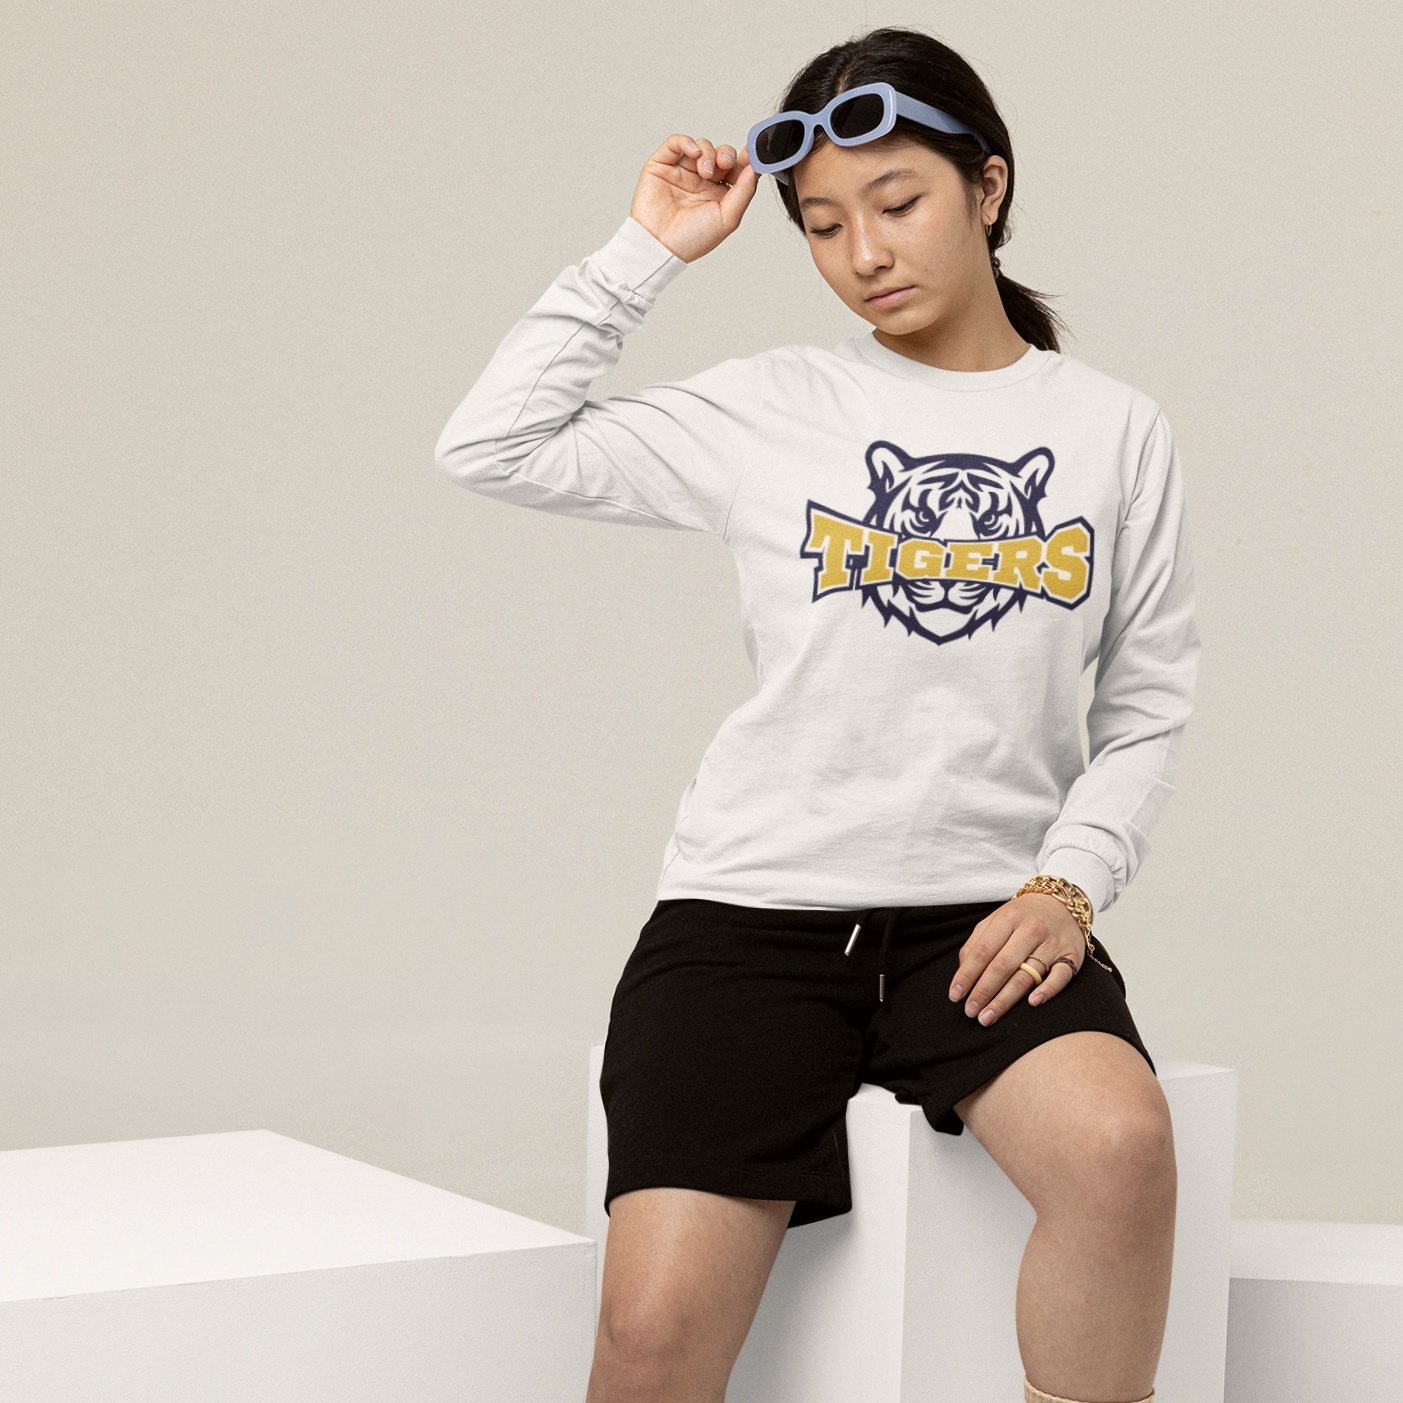 long-sleeve-tee-mockup-featuring-a-teenager-with-a-skater-look-m26214.jpg